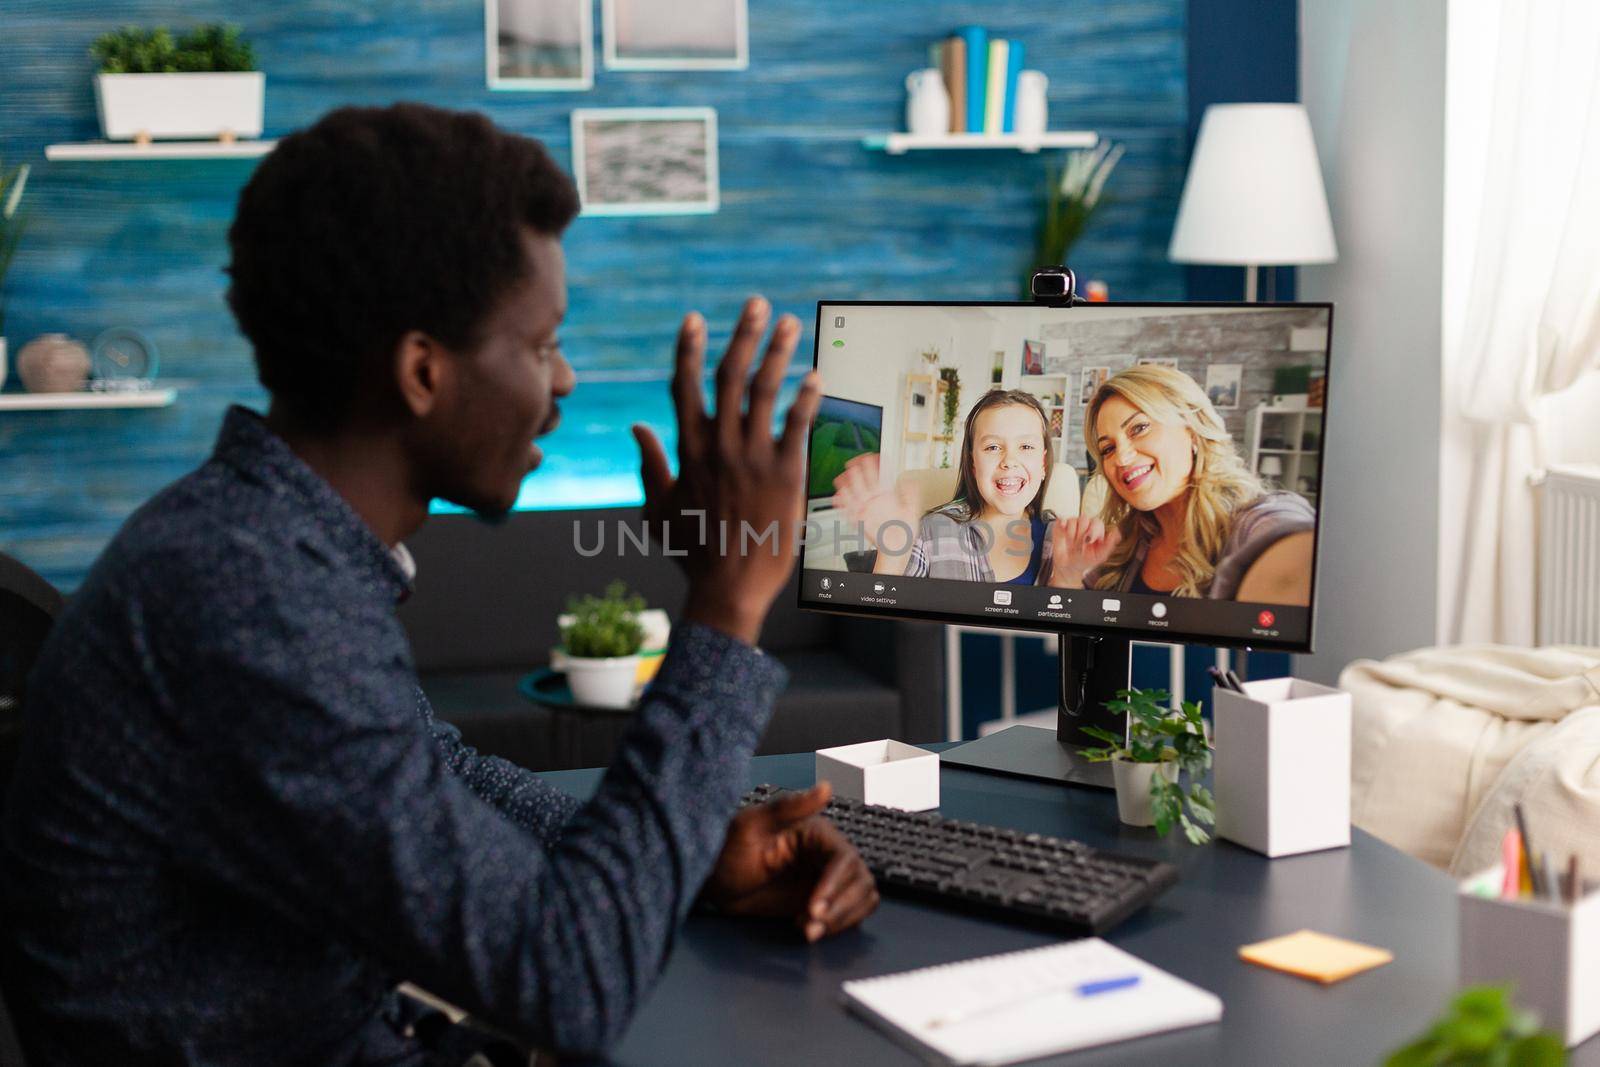 African american man talking on online video call with family and friends using webcam. Black man using digital internet conference from home office for virtual chat communication